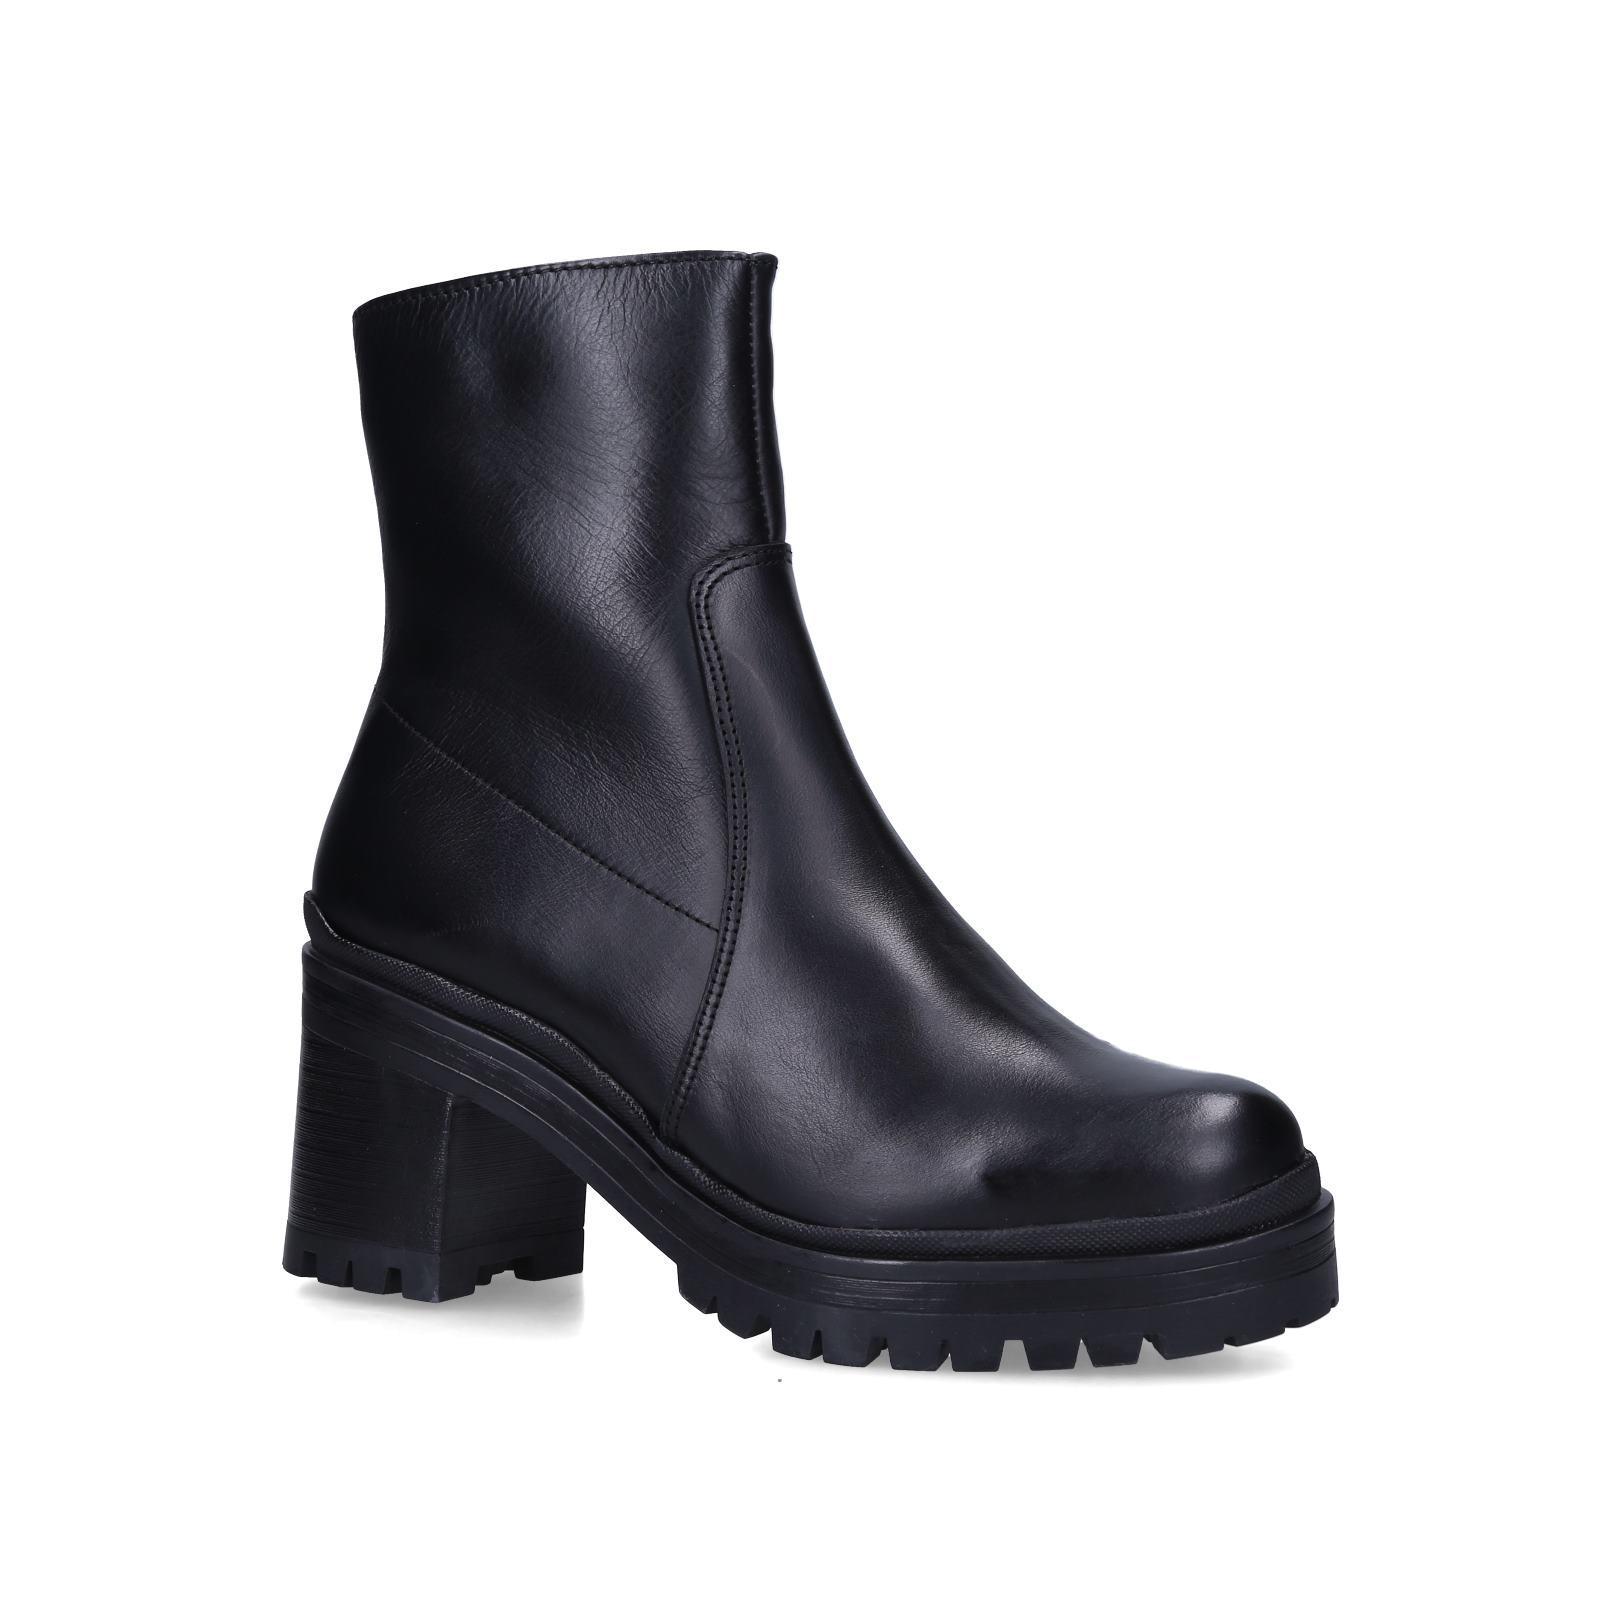 SECURE ANKLE BOOT Black High Ankle Block Heel Boots by CARVELA COMFORT